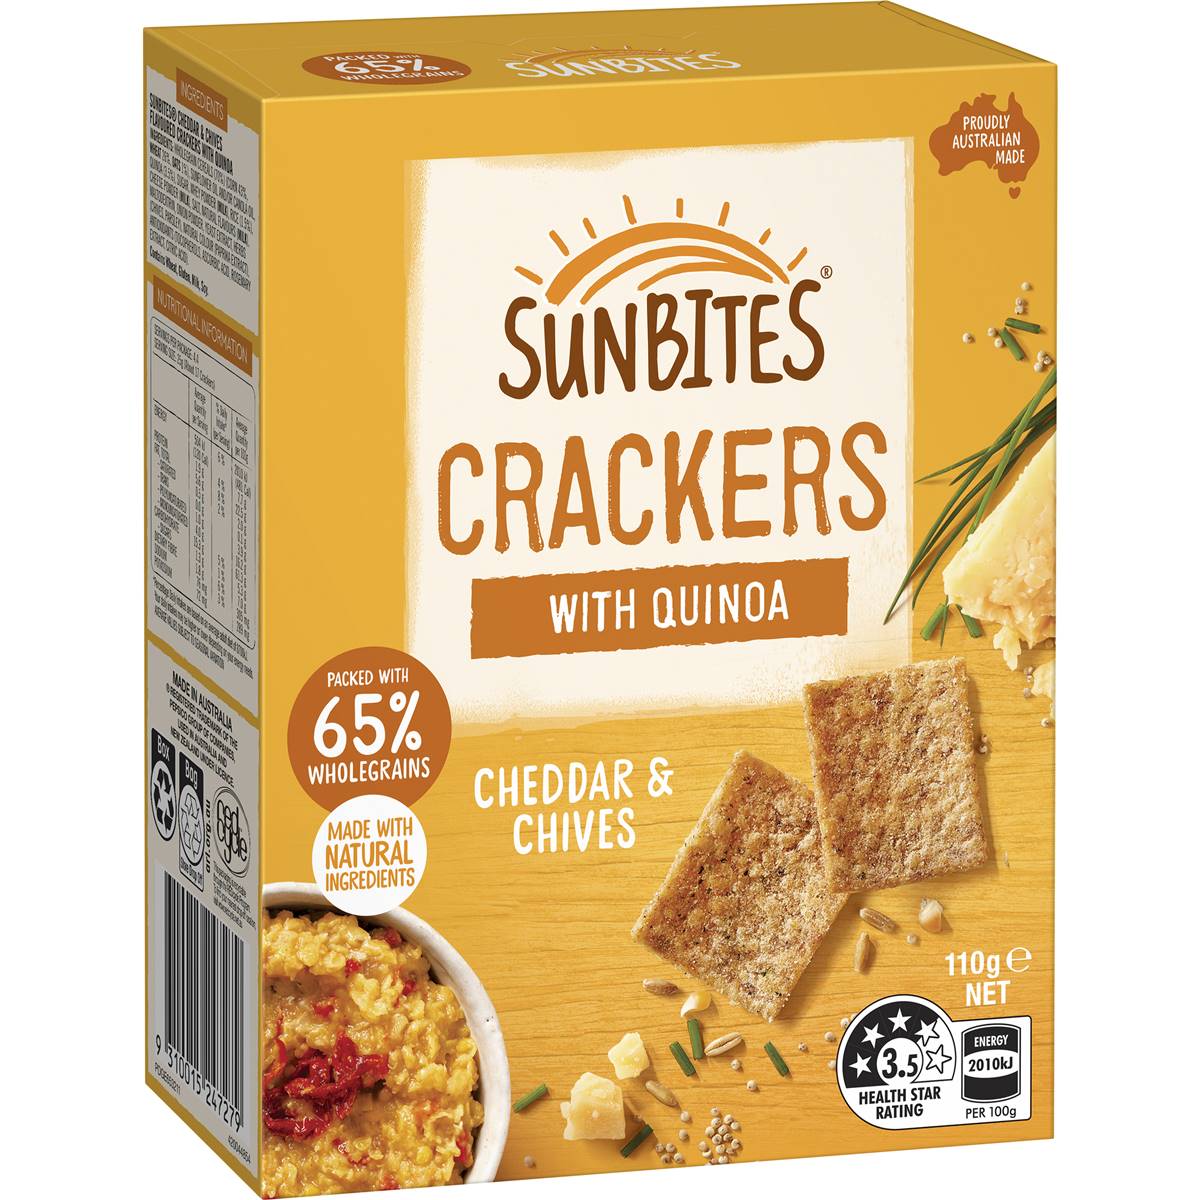 Calories in Sunbites Crackers With Quinoa Cheddar & Chives